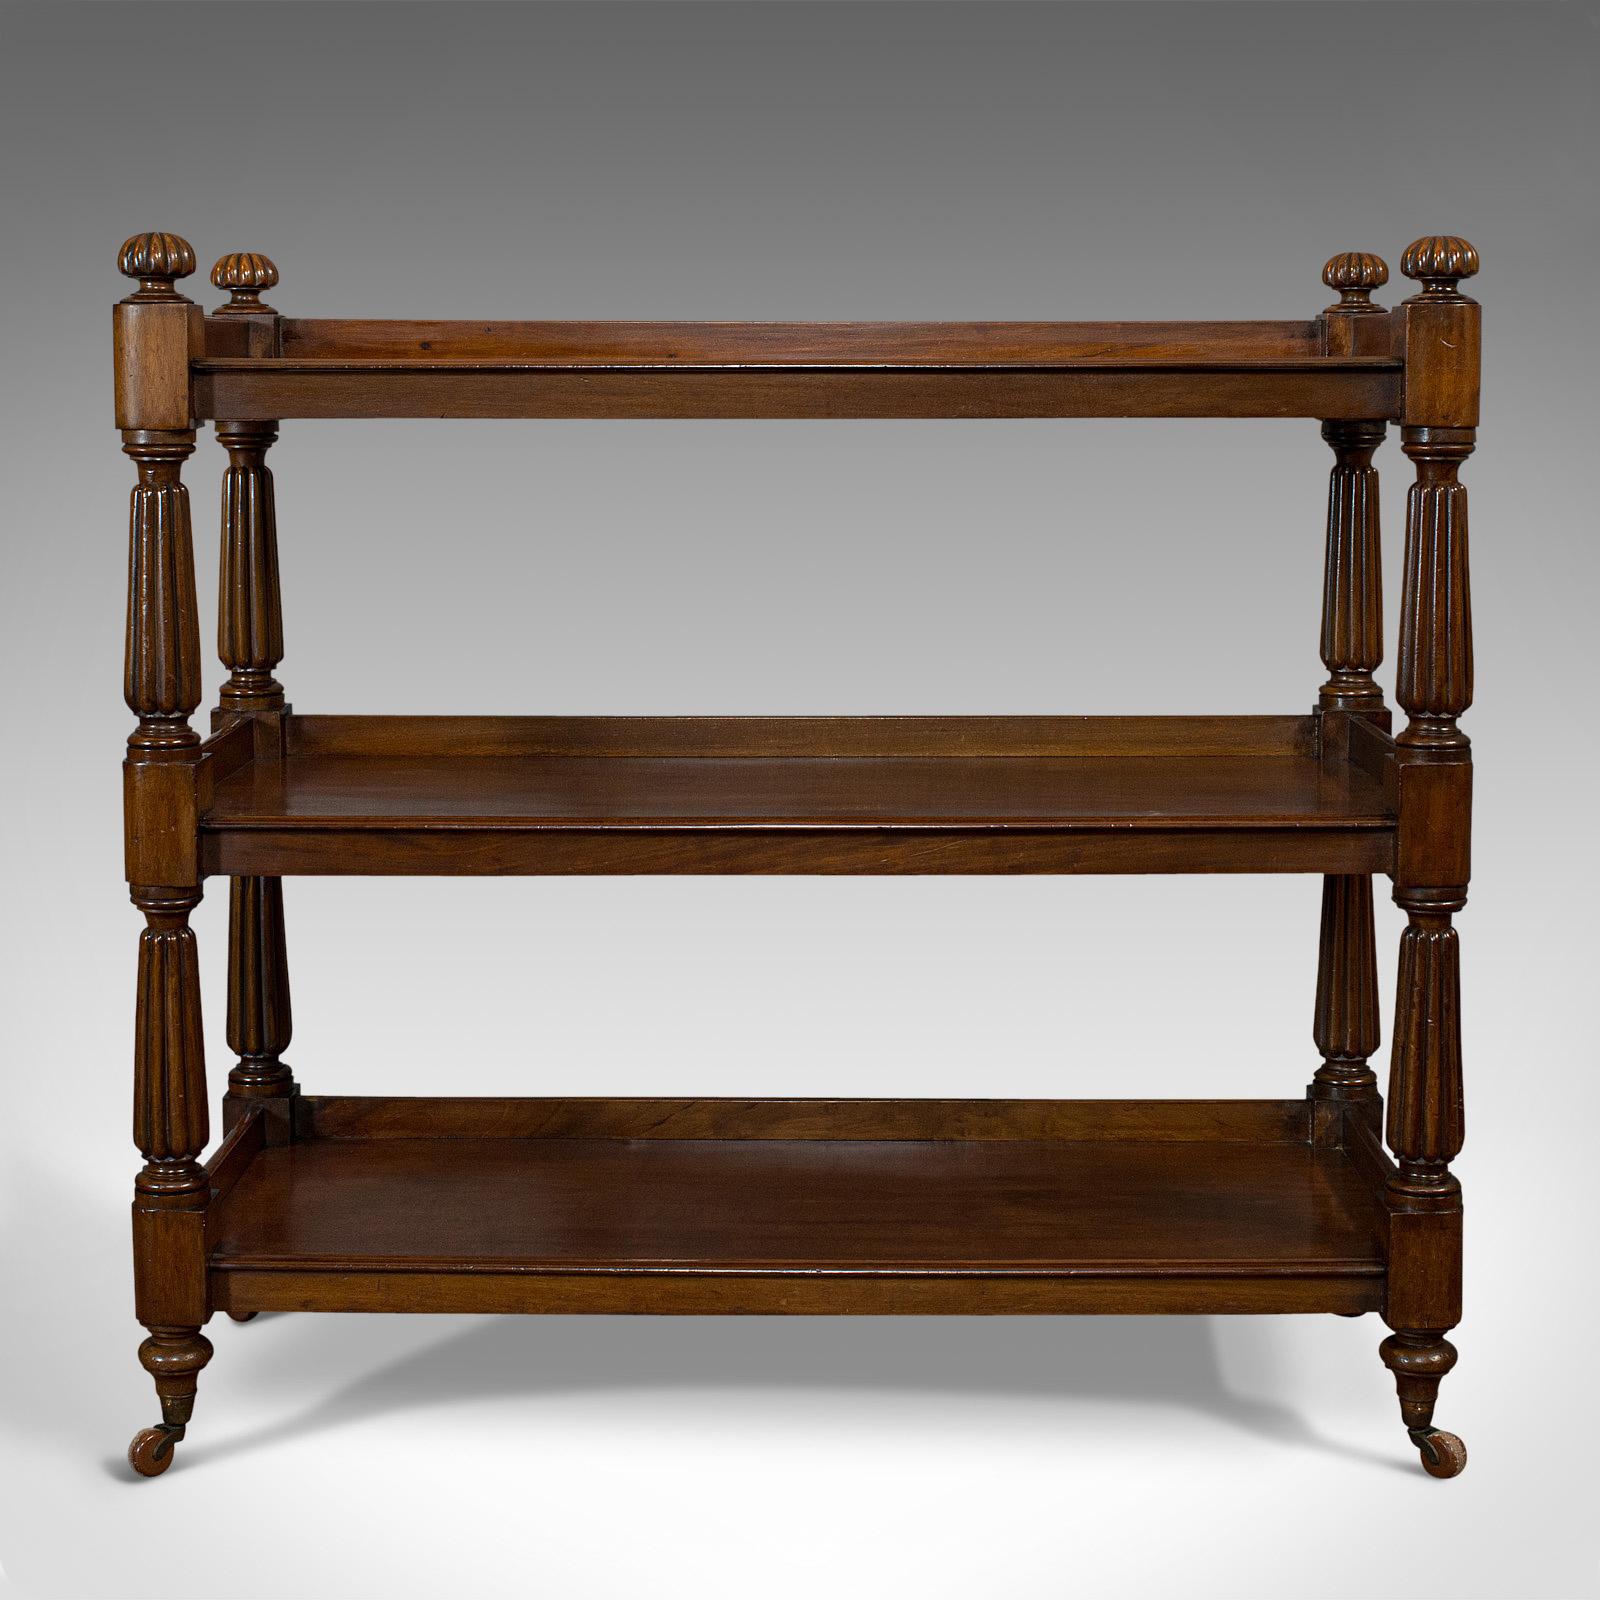 This is an antique 3-tier buffet trolley. An English, mahogany side table or server, dating to the William IV period, circa 1830.

Superb example of William IV furniture
Displays a desirable aged patina
Select mahogany shows fine grain